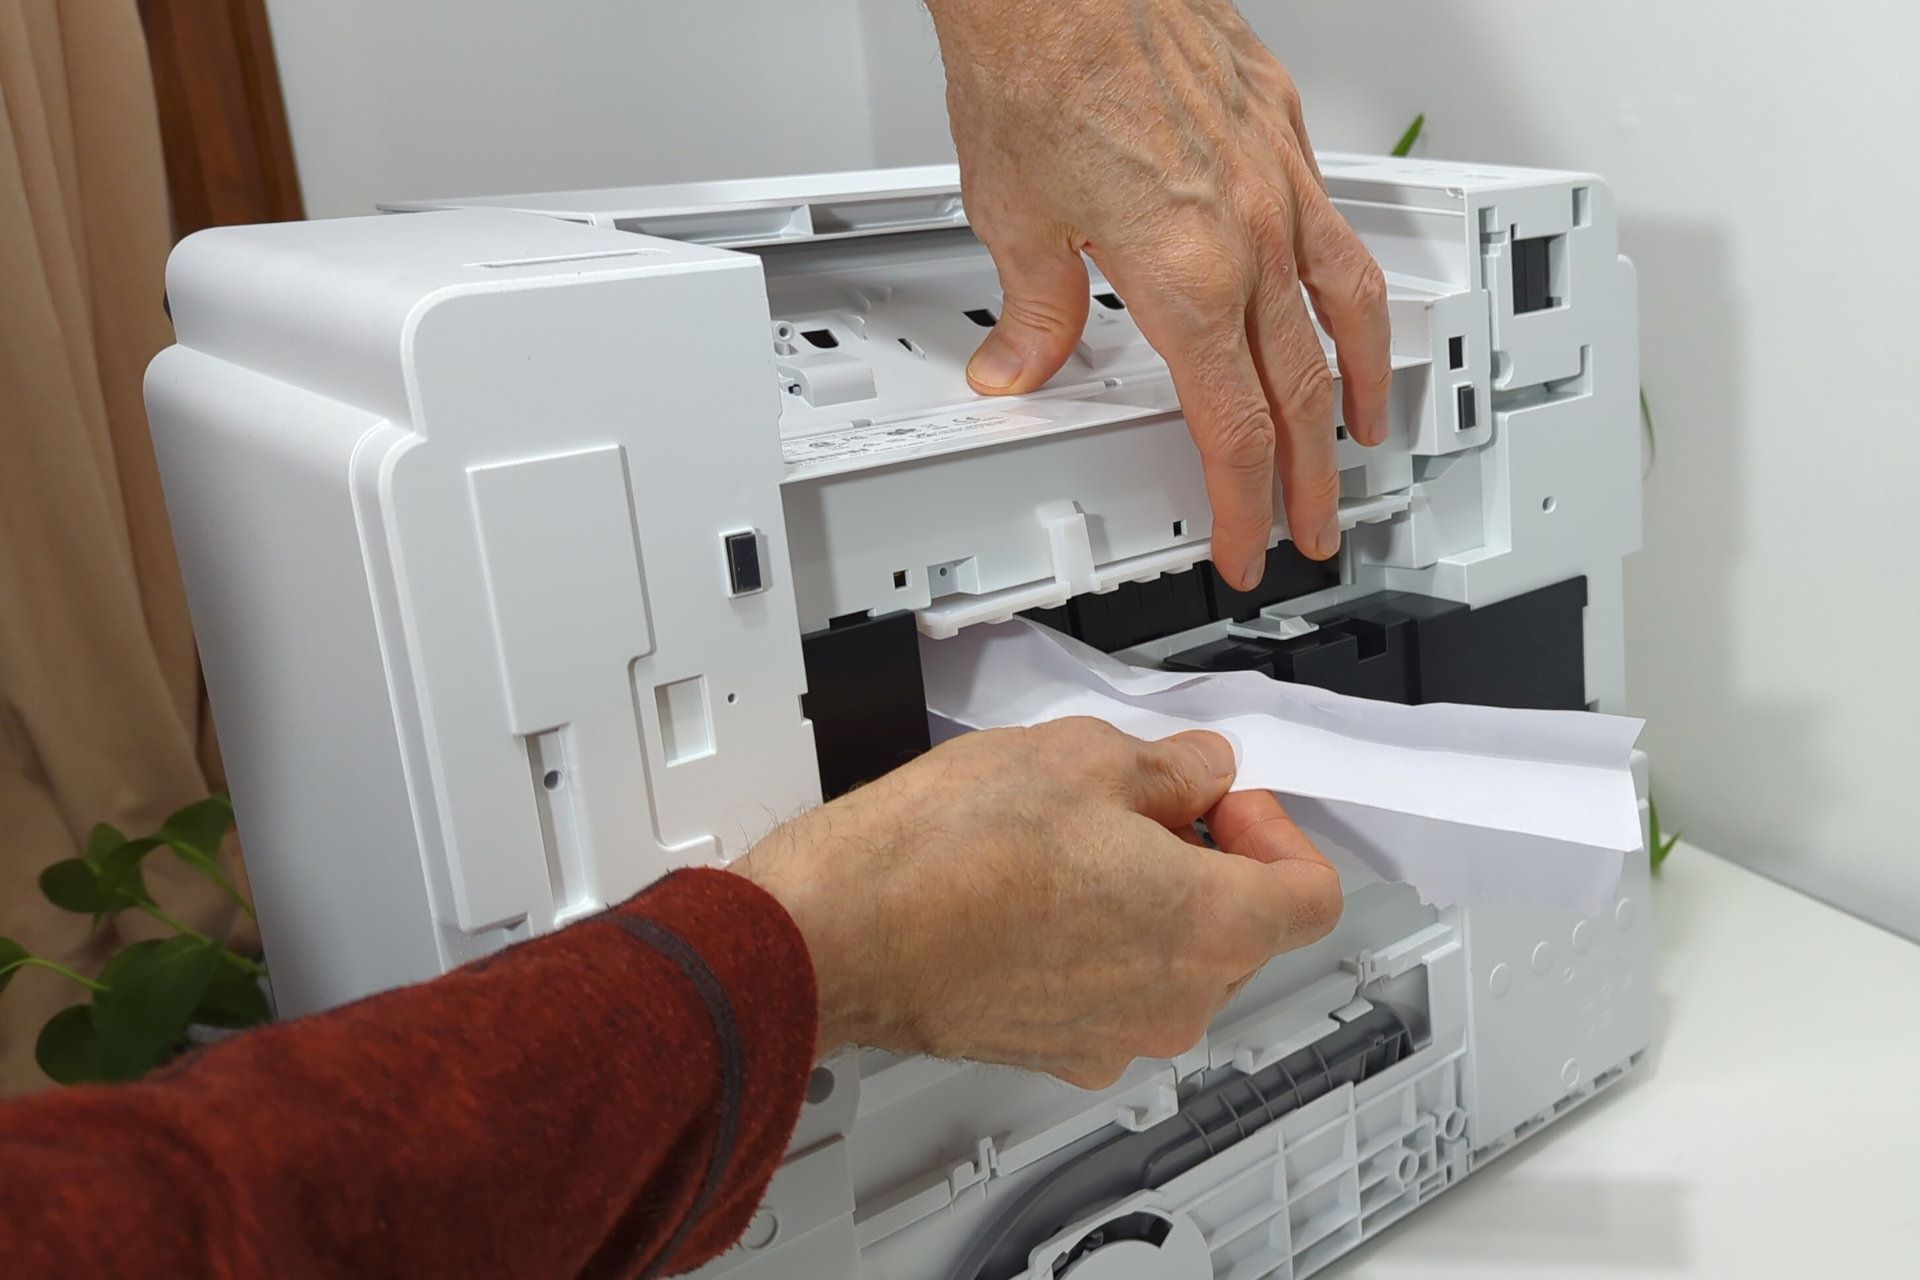 Epson Printer Paper Jam And Feed Problems Fix Solution